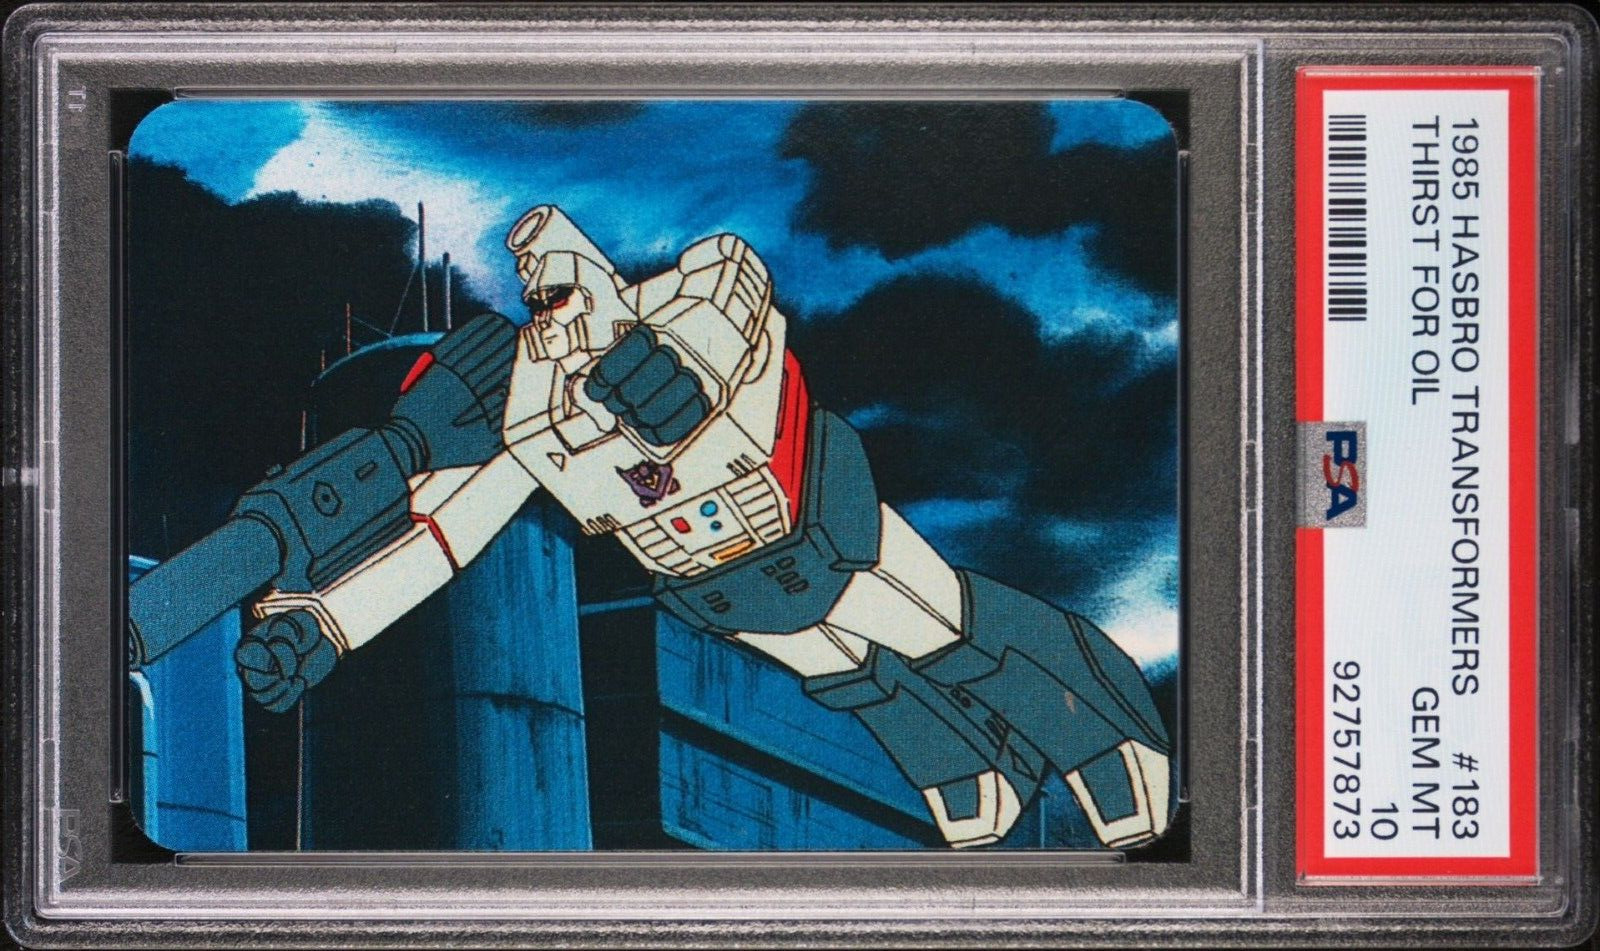 1985 Hasbro Transformers #183 Thirst for Oil PSA 10